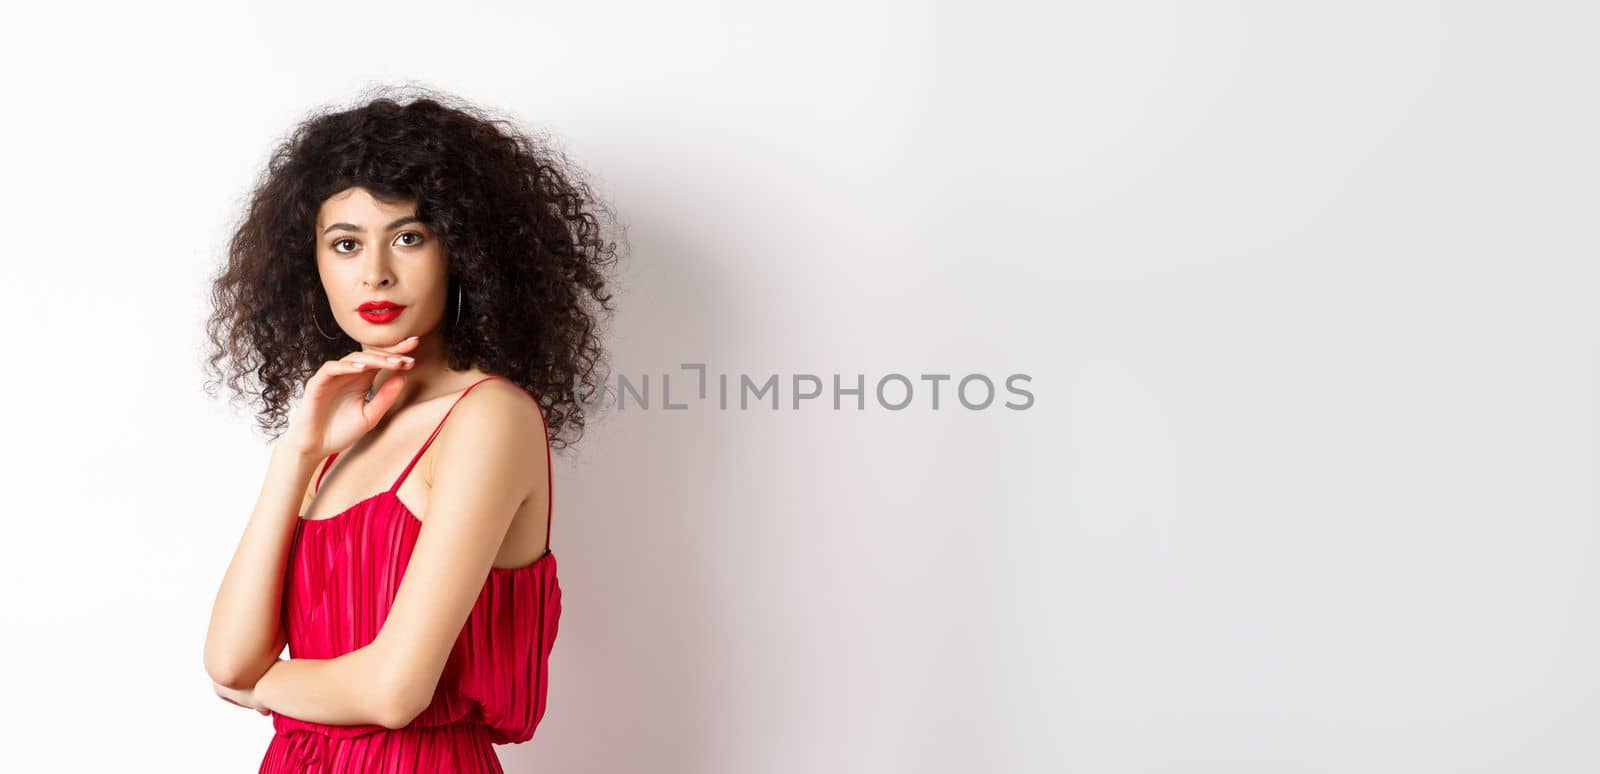 Beauty and fashion. Elegant lady with curly hair and red lips, fashionable makeup, wearing dress, gently touching chin and looking sensual at camera, white background by Benzoix